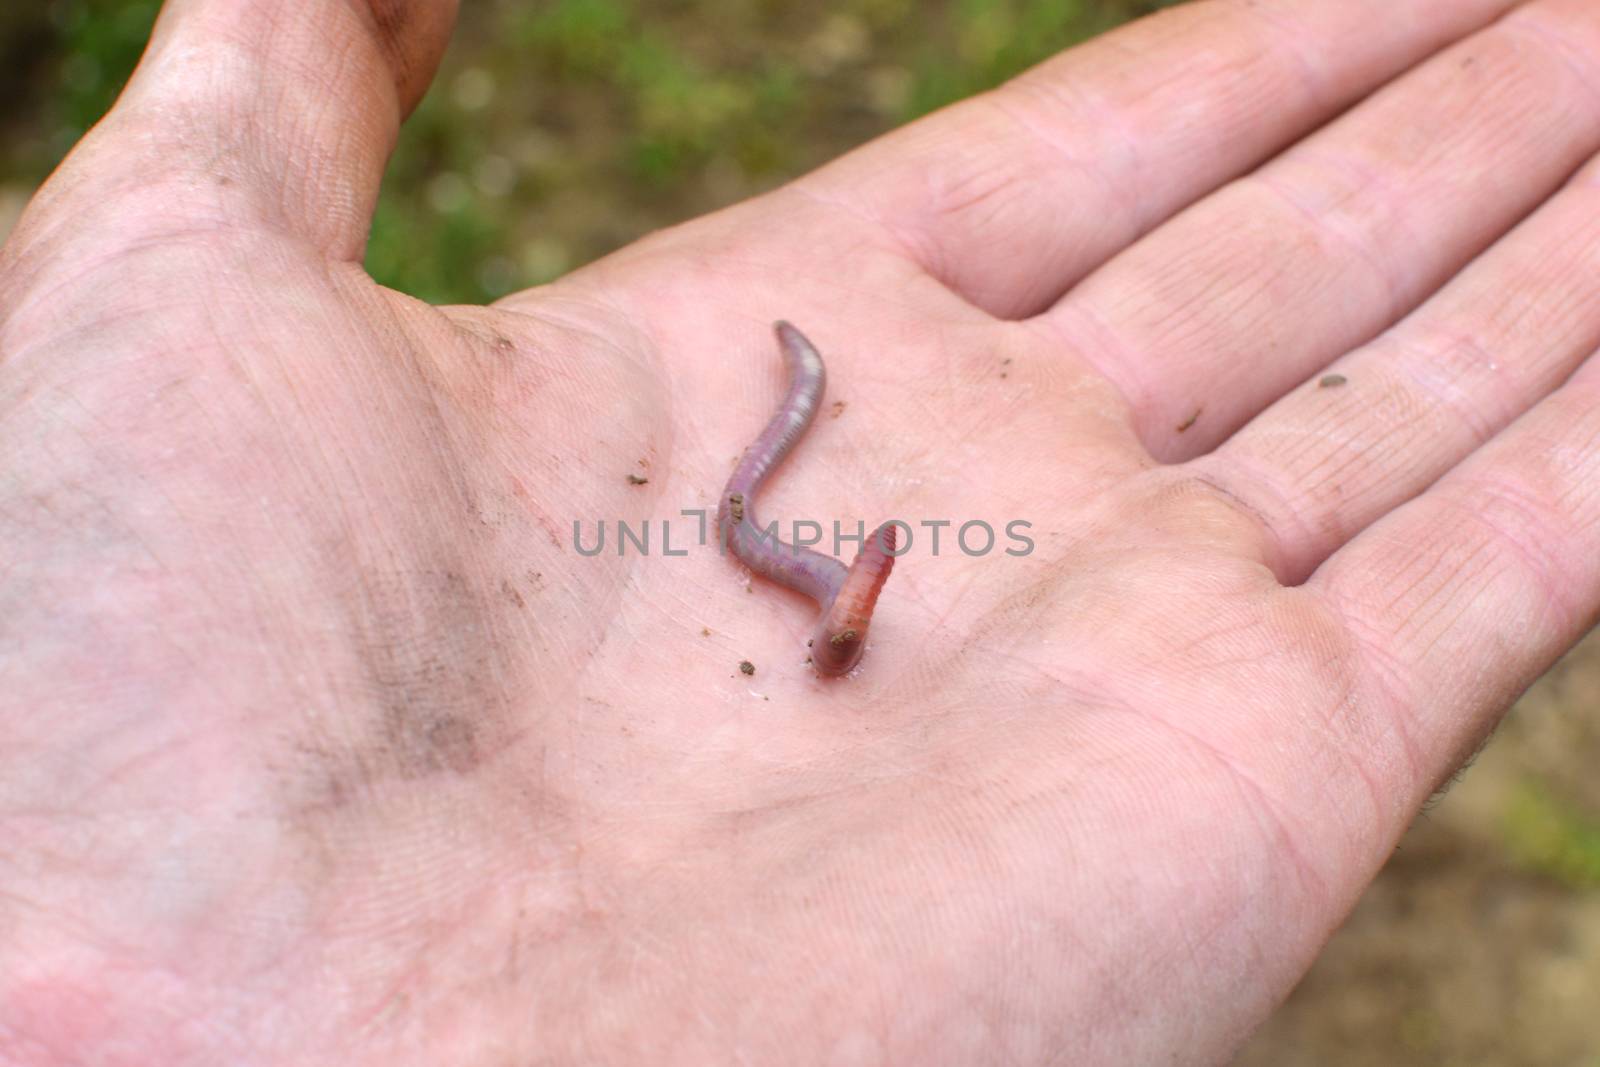 Worm in the Hand by photosampler